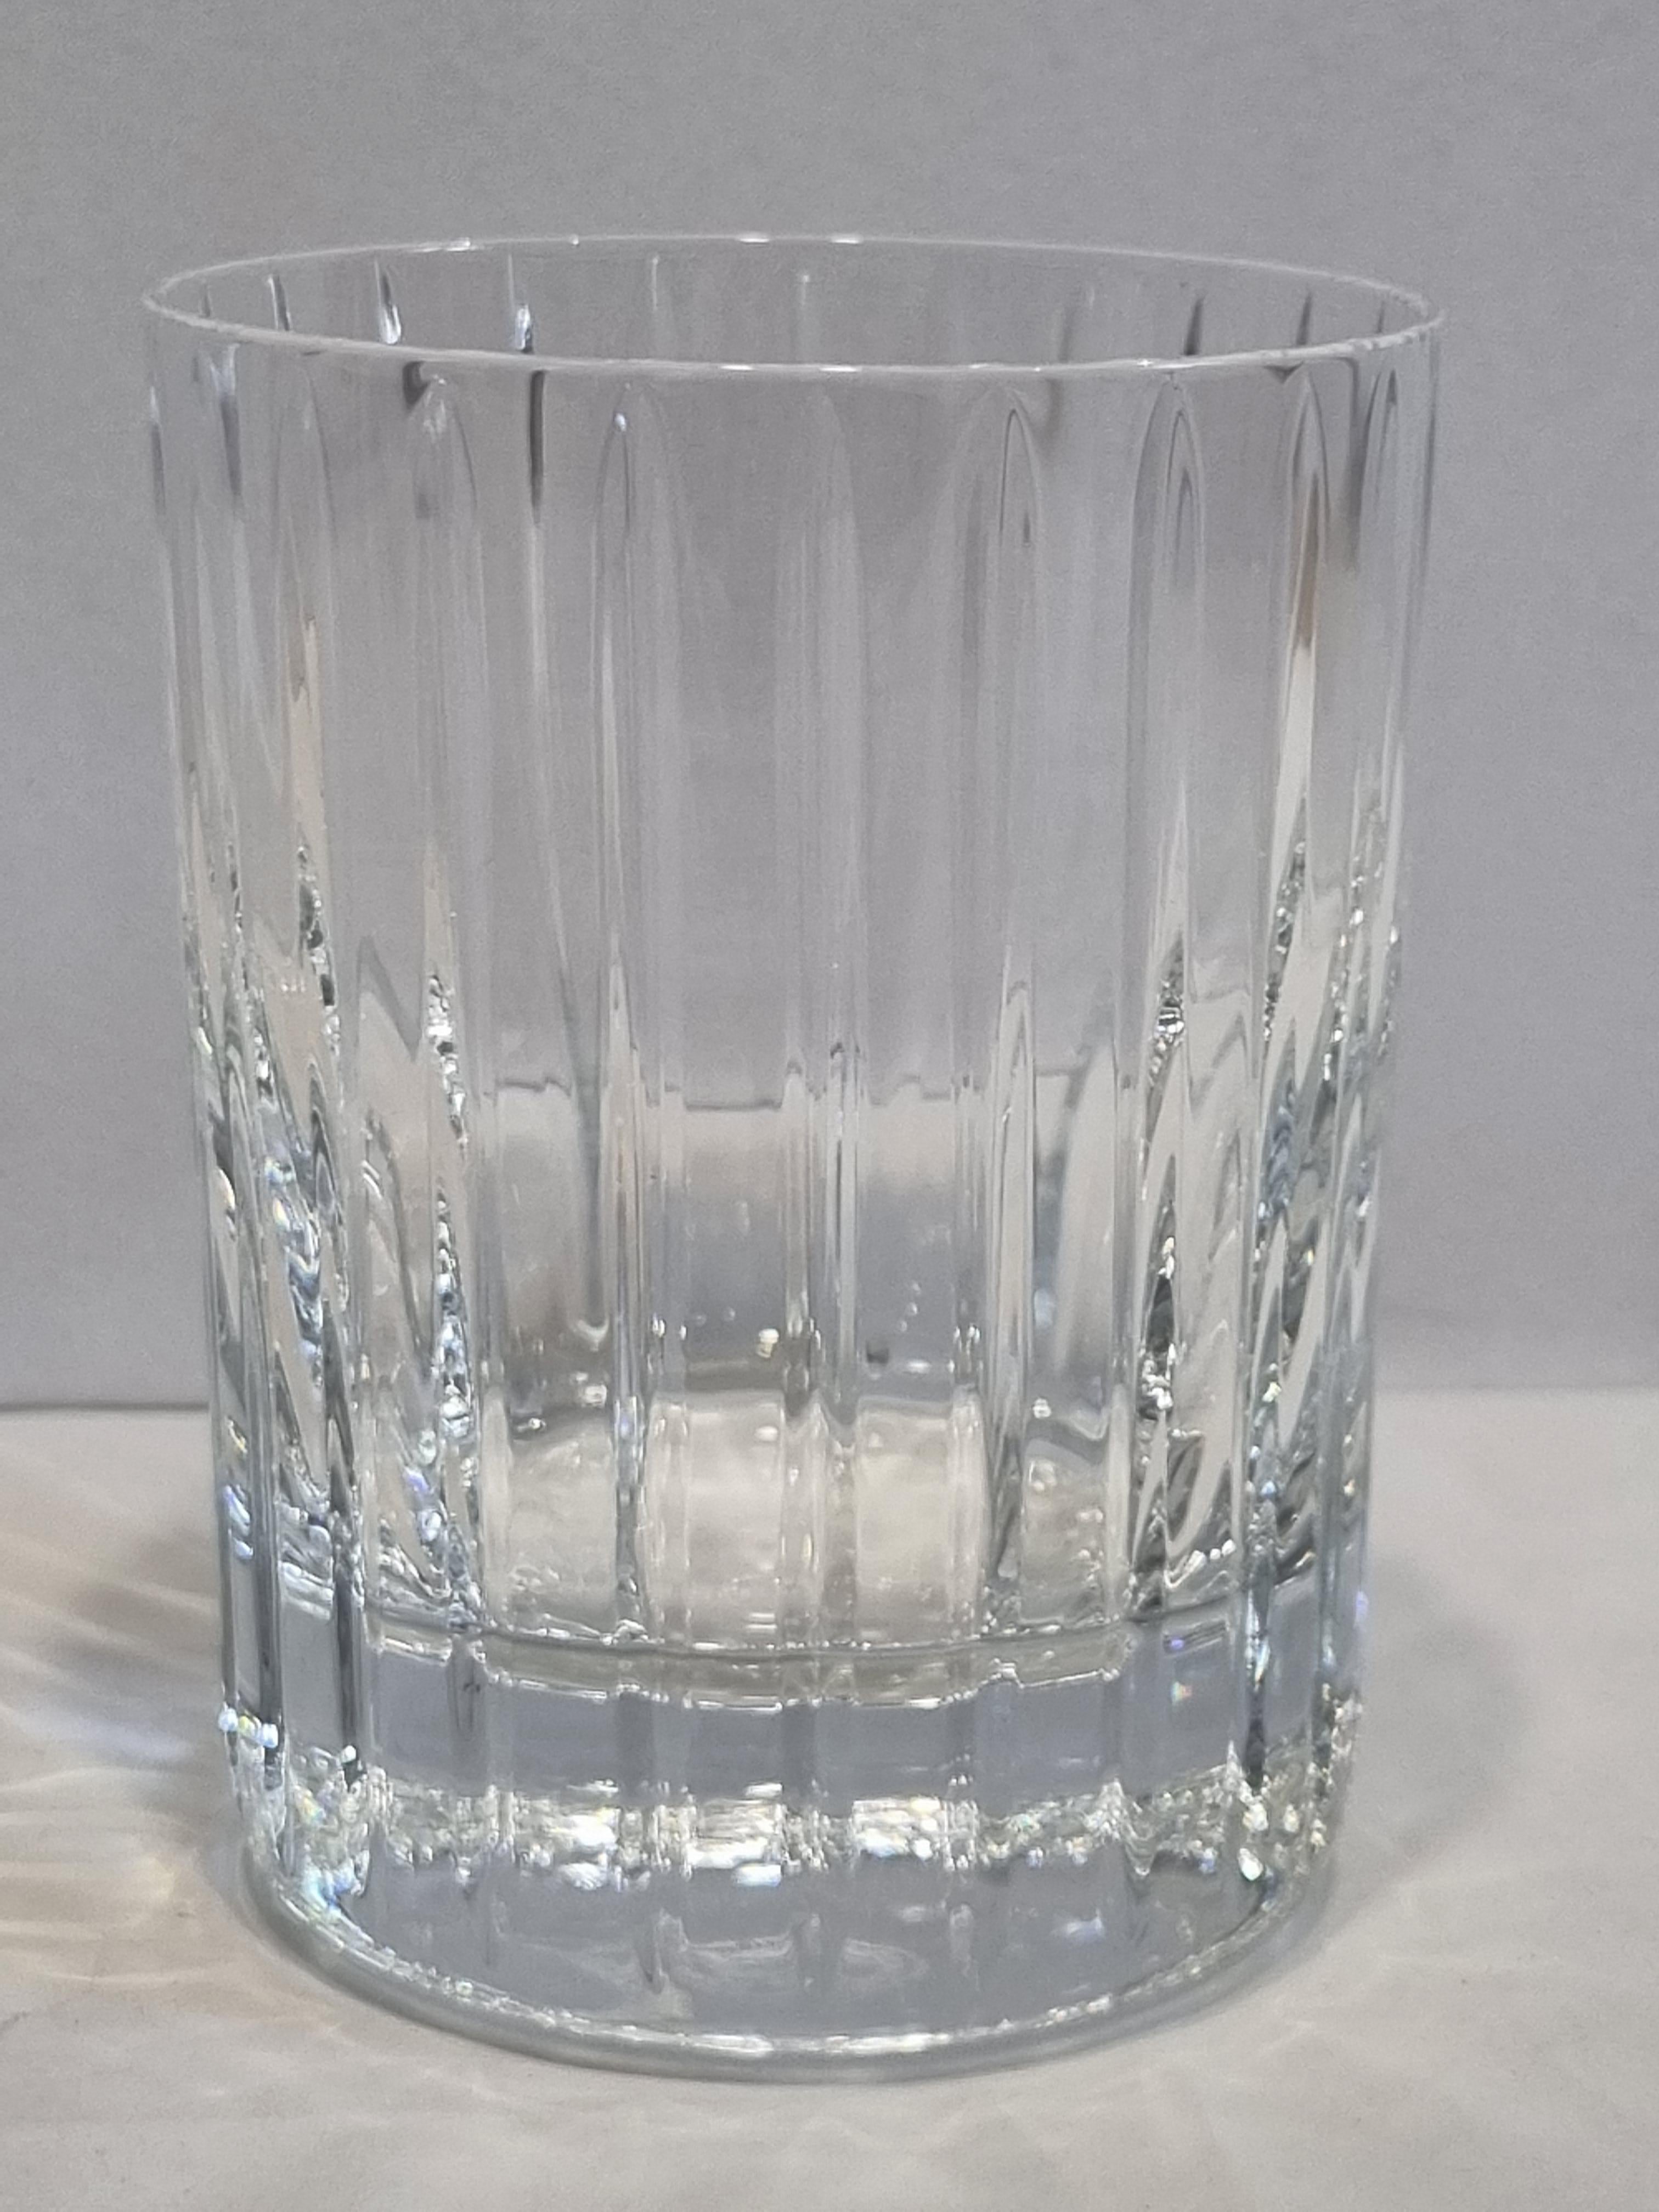 The Baccarat Clear crystal Harmonie tumbler has a marvelously linear silhouette that would be ideal for any stocked bar.
Consecutive parallel cuts travel cleanly along the Clear crystal grazing the tumbler from its lip all the way down to its thick